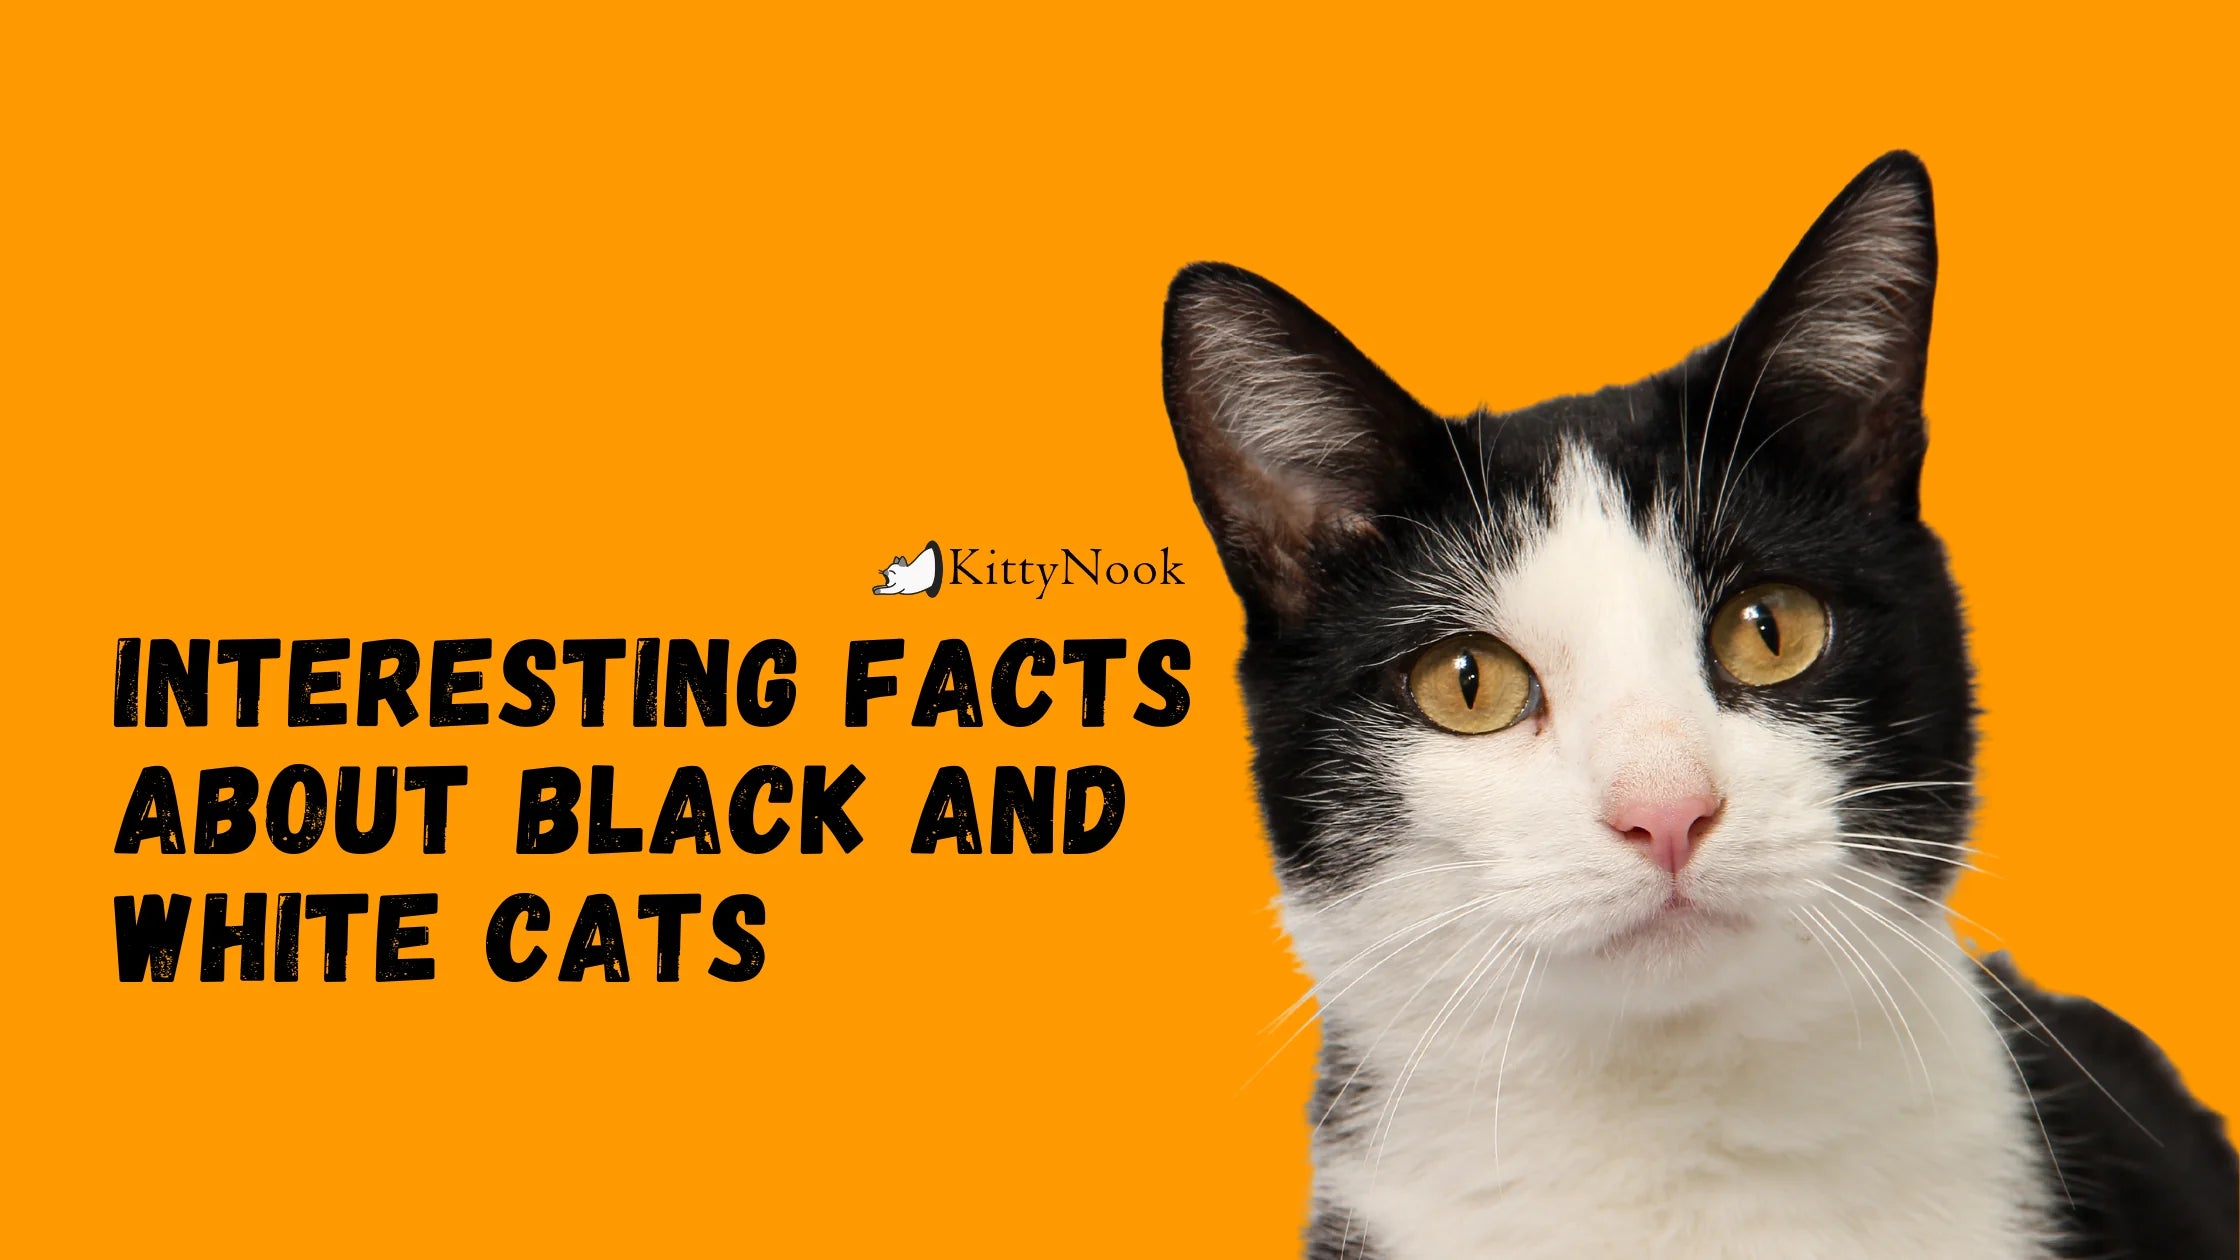 Interesting Facts About Black and White Cats - KittyNook Cat Company